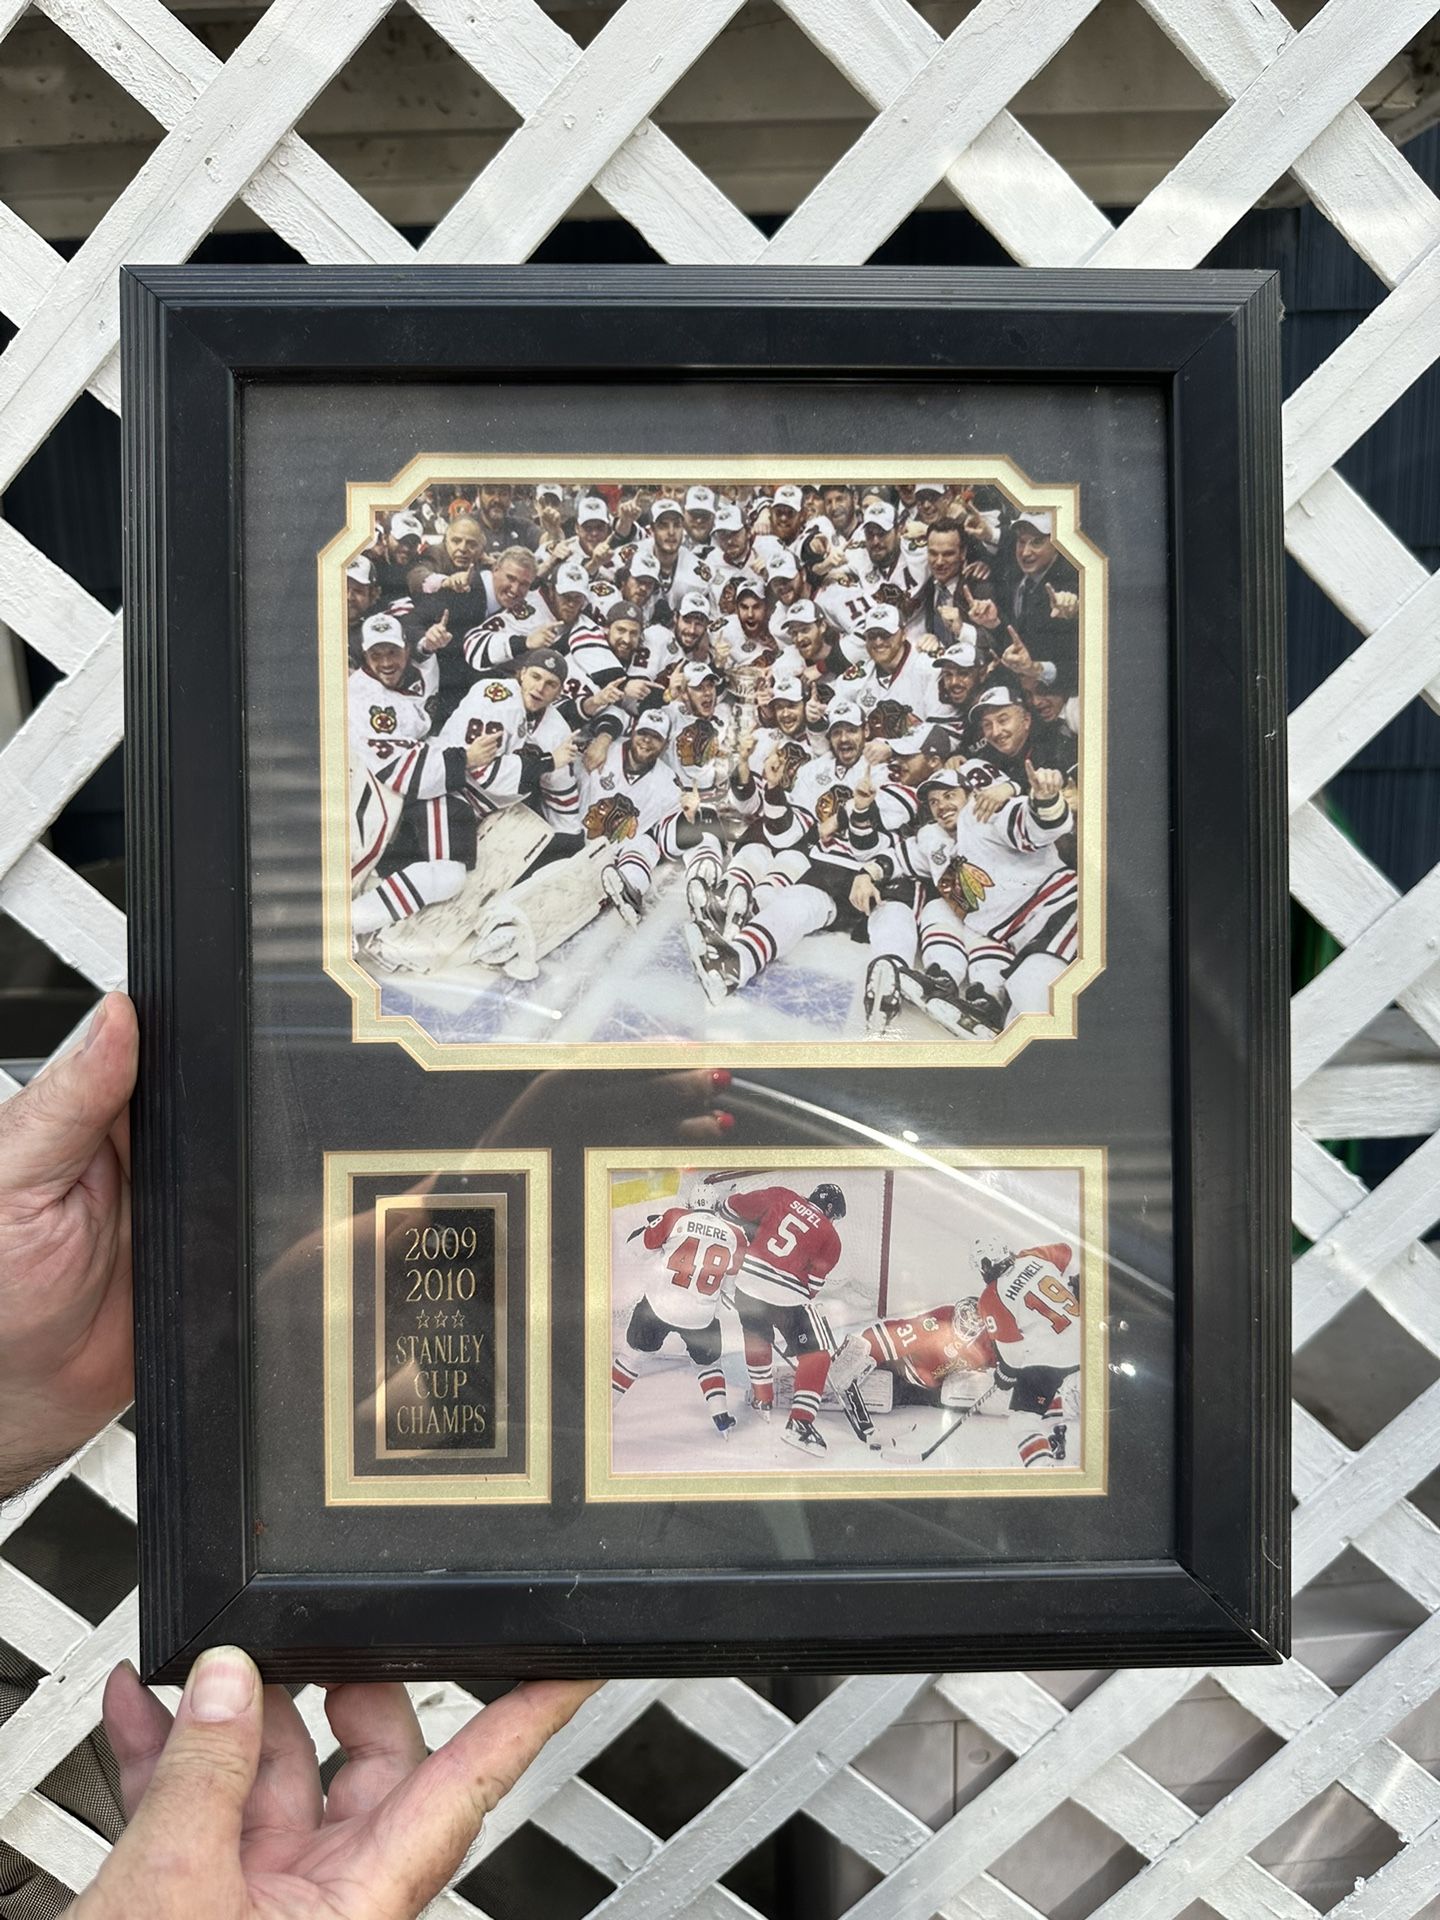 Chicago Blackhawks Stanley cup framed picture.